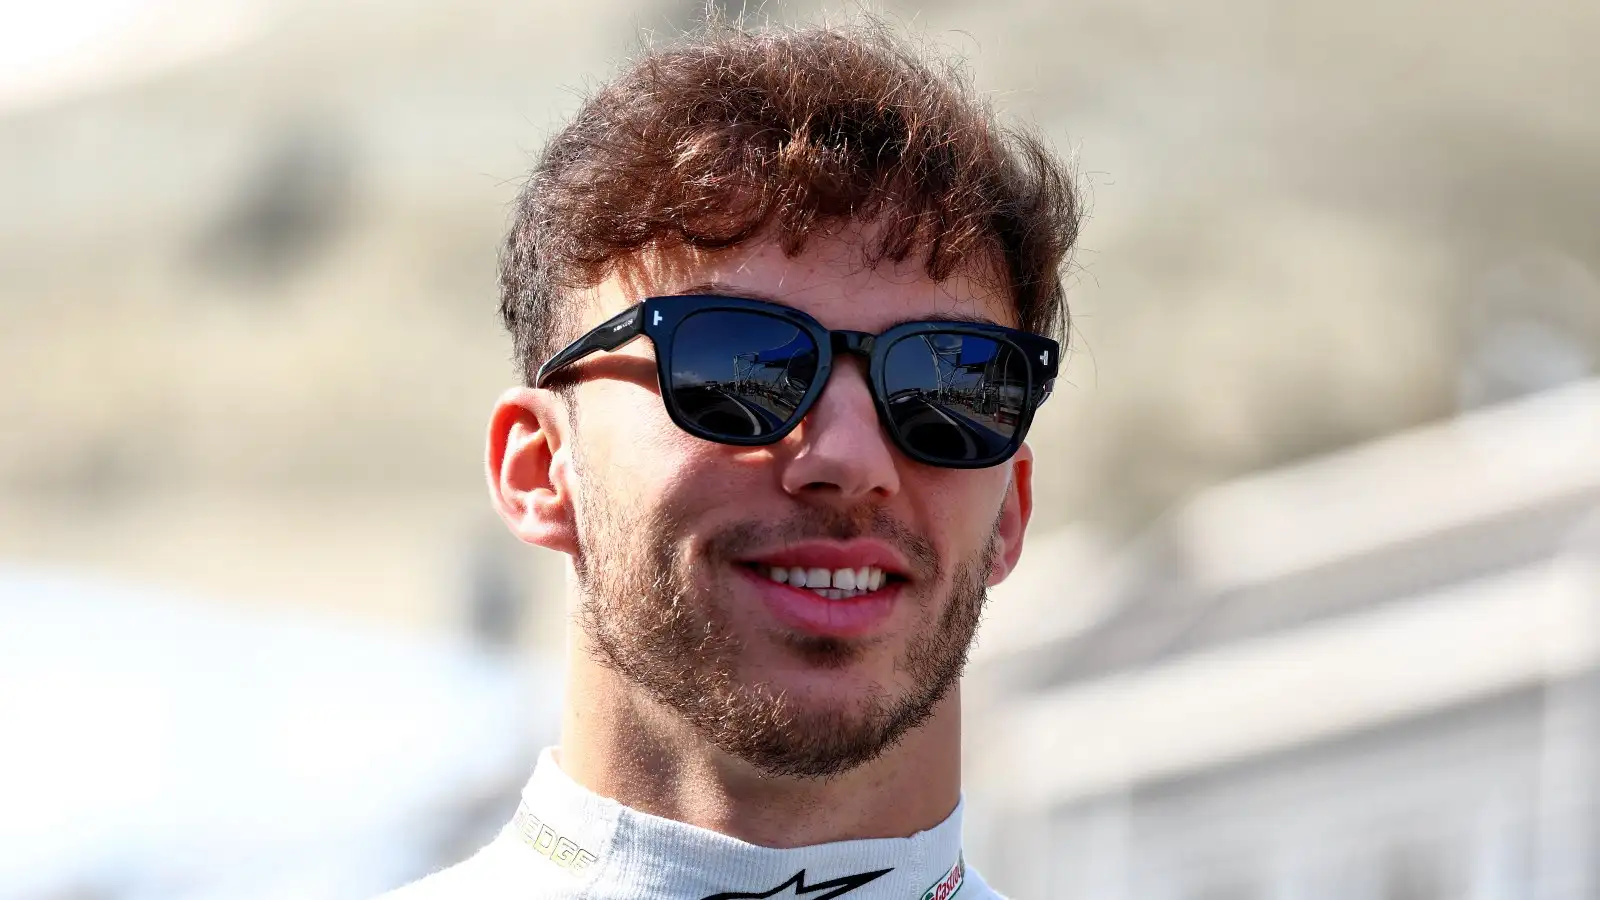 Pierre Gasly smiling whilst wearing sunglasses. Bahrain, February 2023.